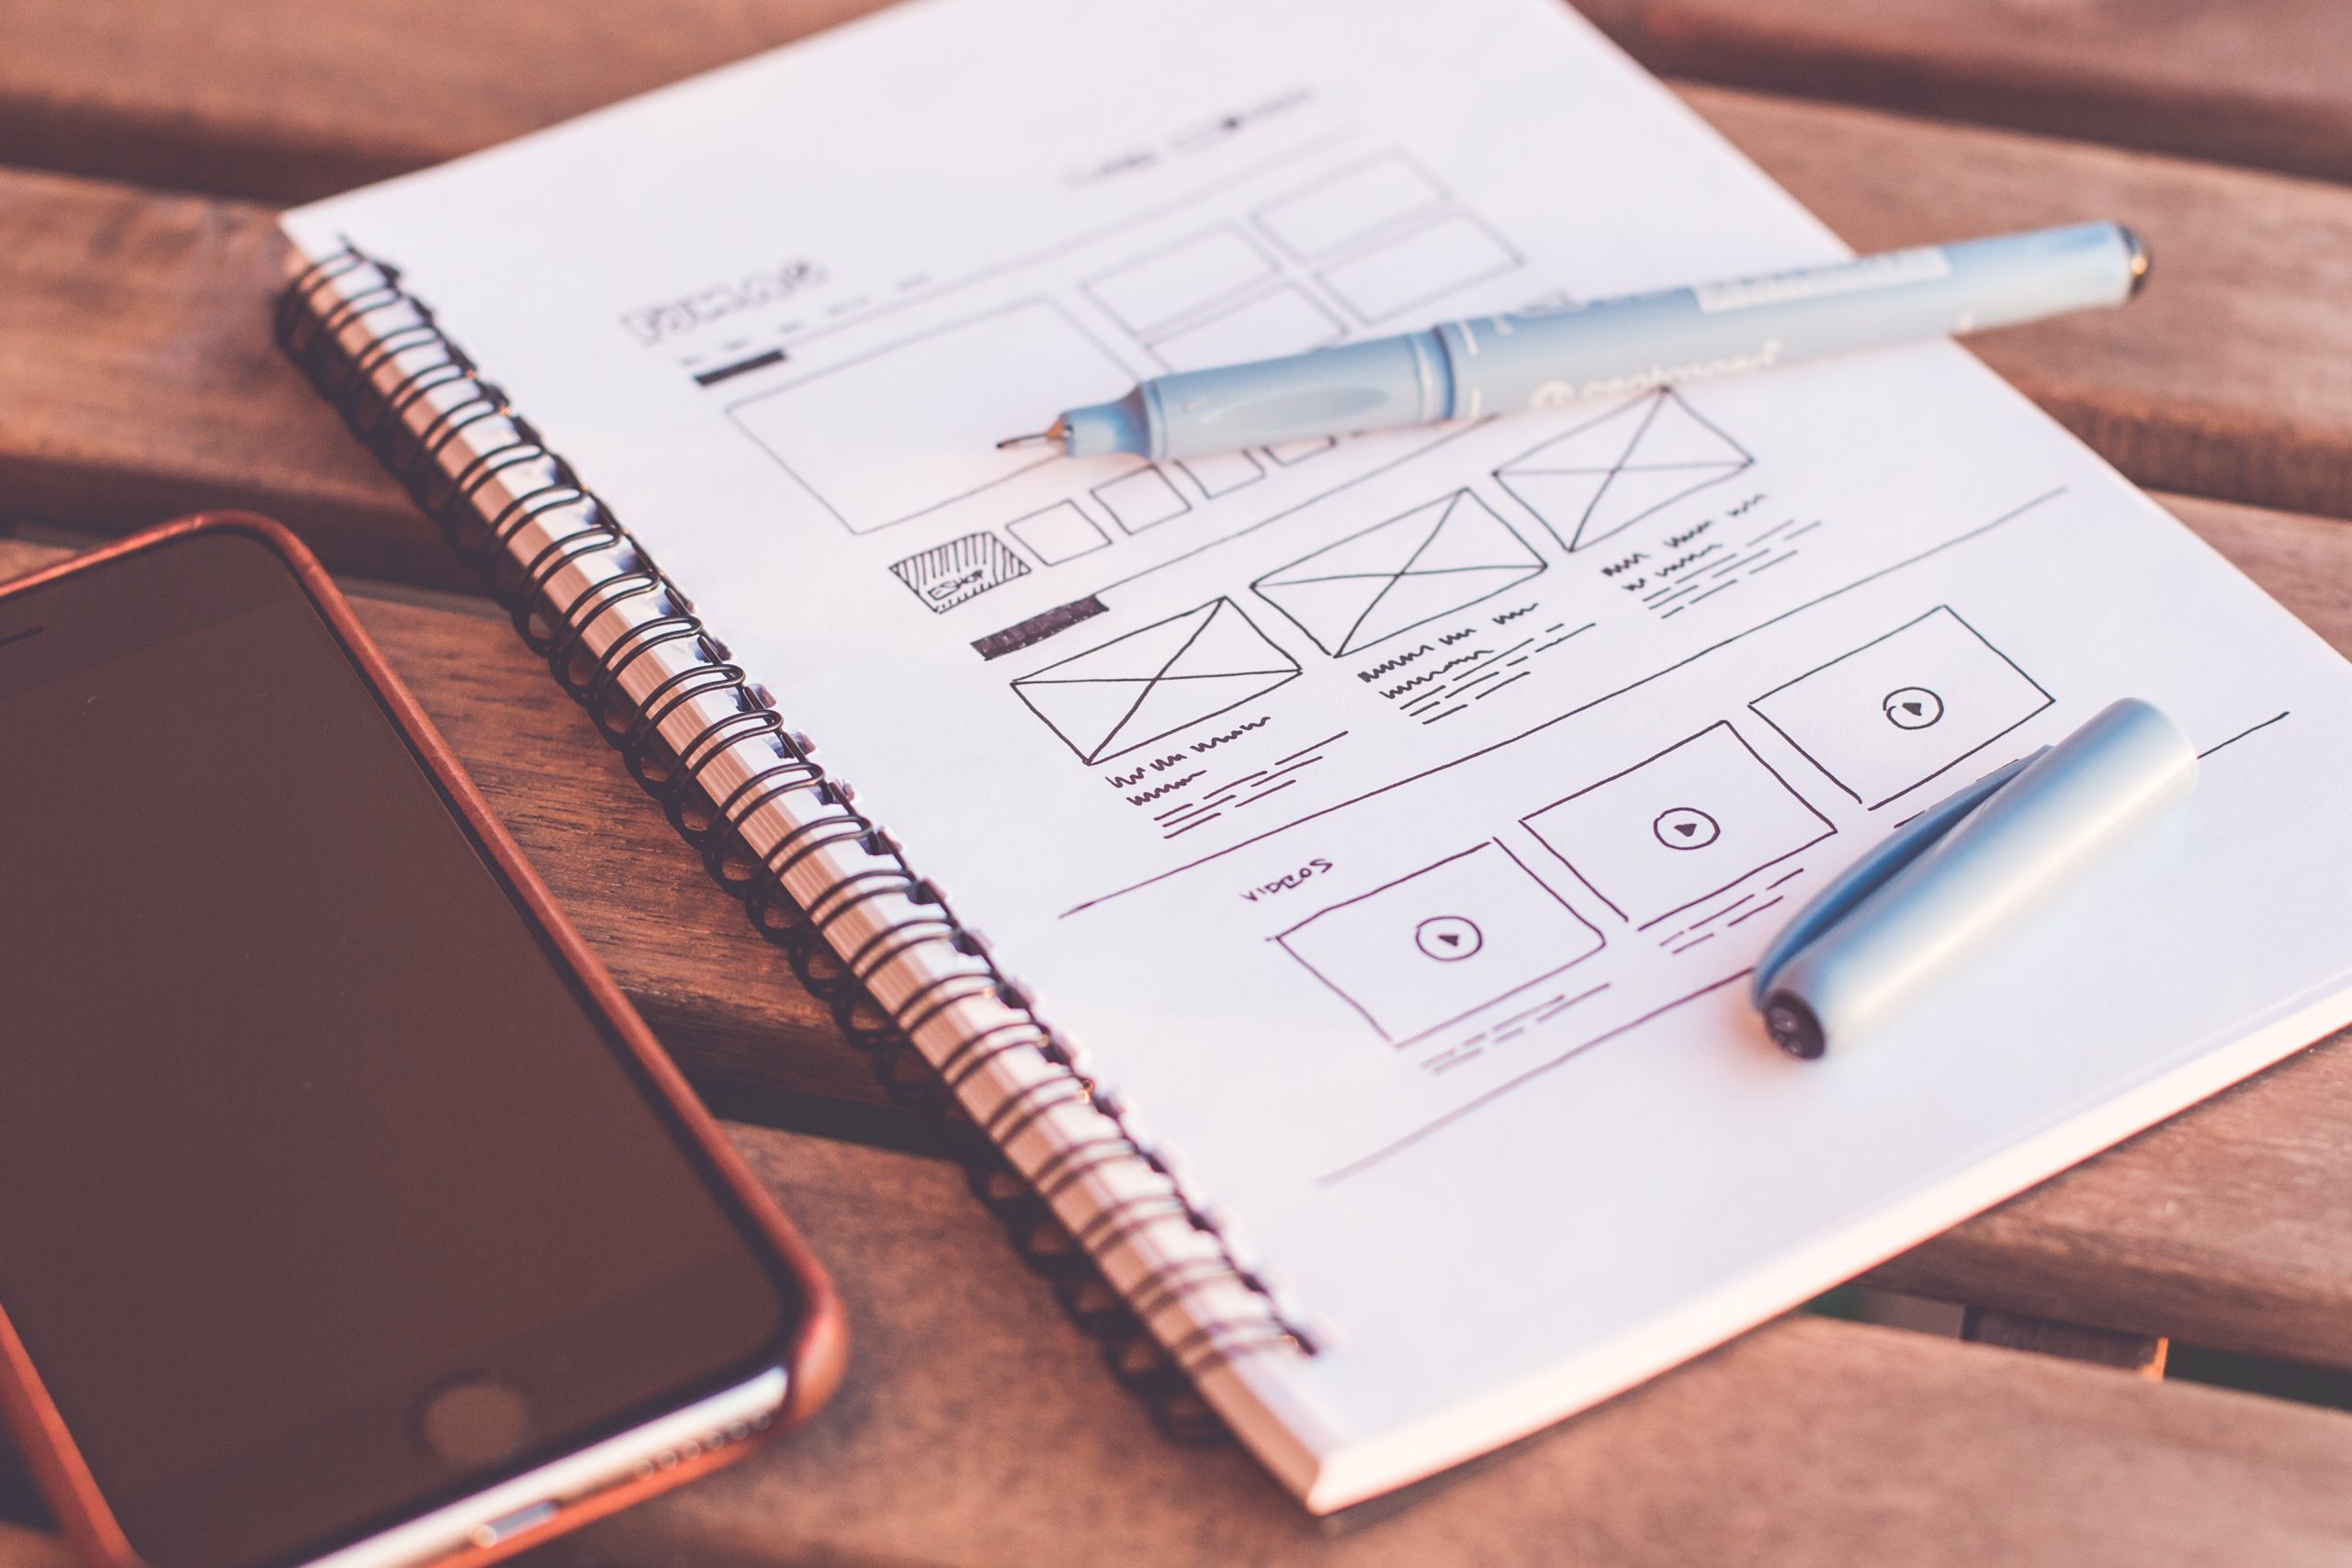 notebook showing a wireframe design